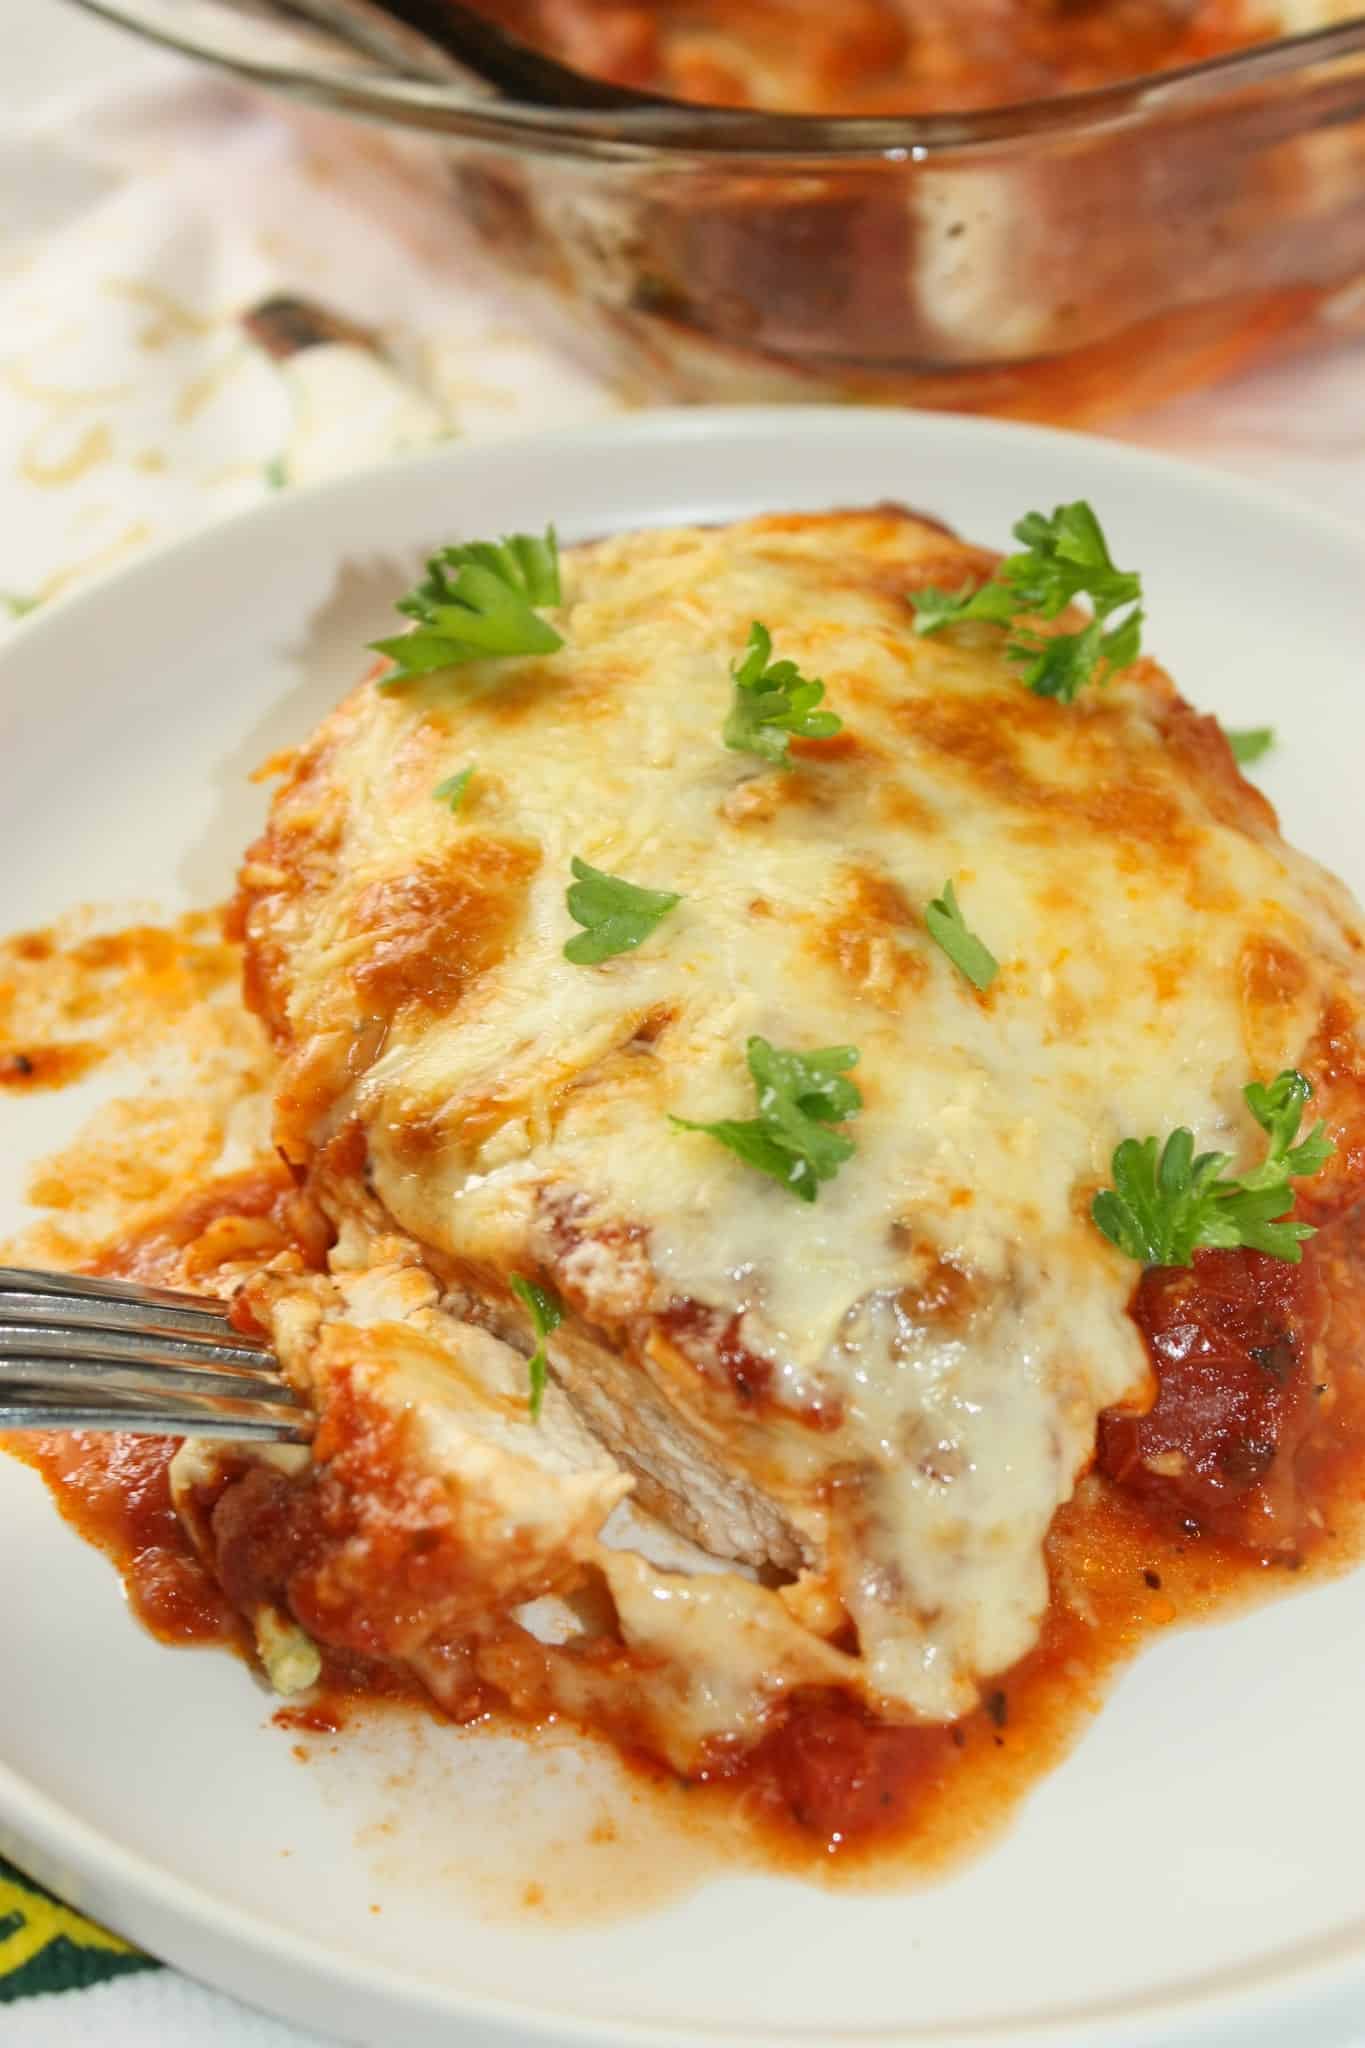 Gluten Free Chicken Parmesan is a delicious chicken recipe that can be served with or without a healthy serving of pasta.